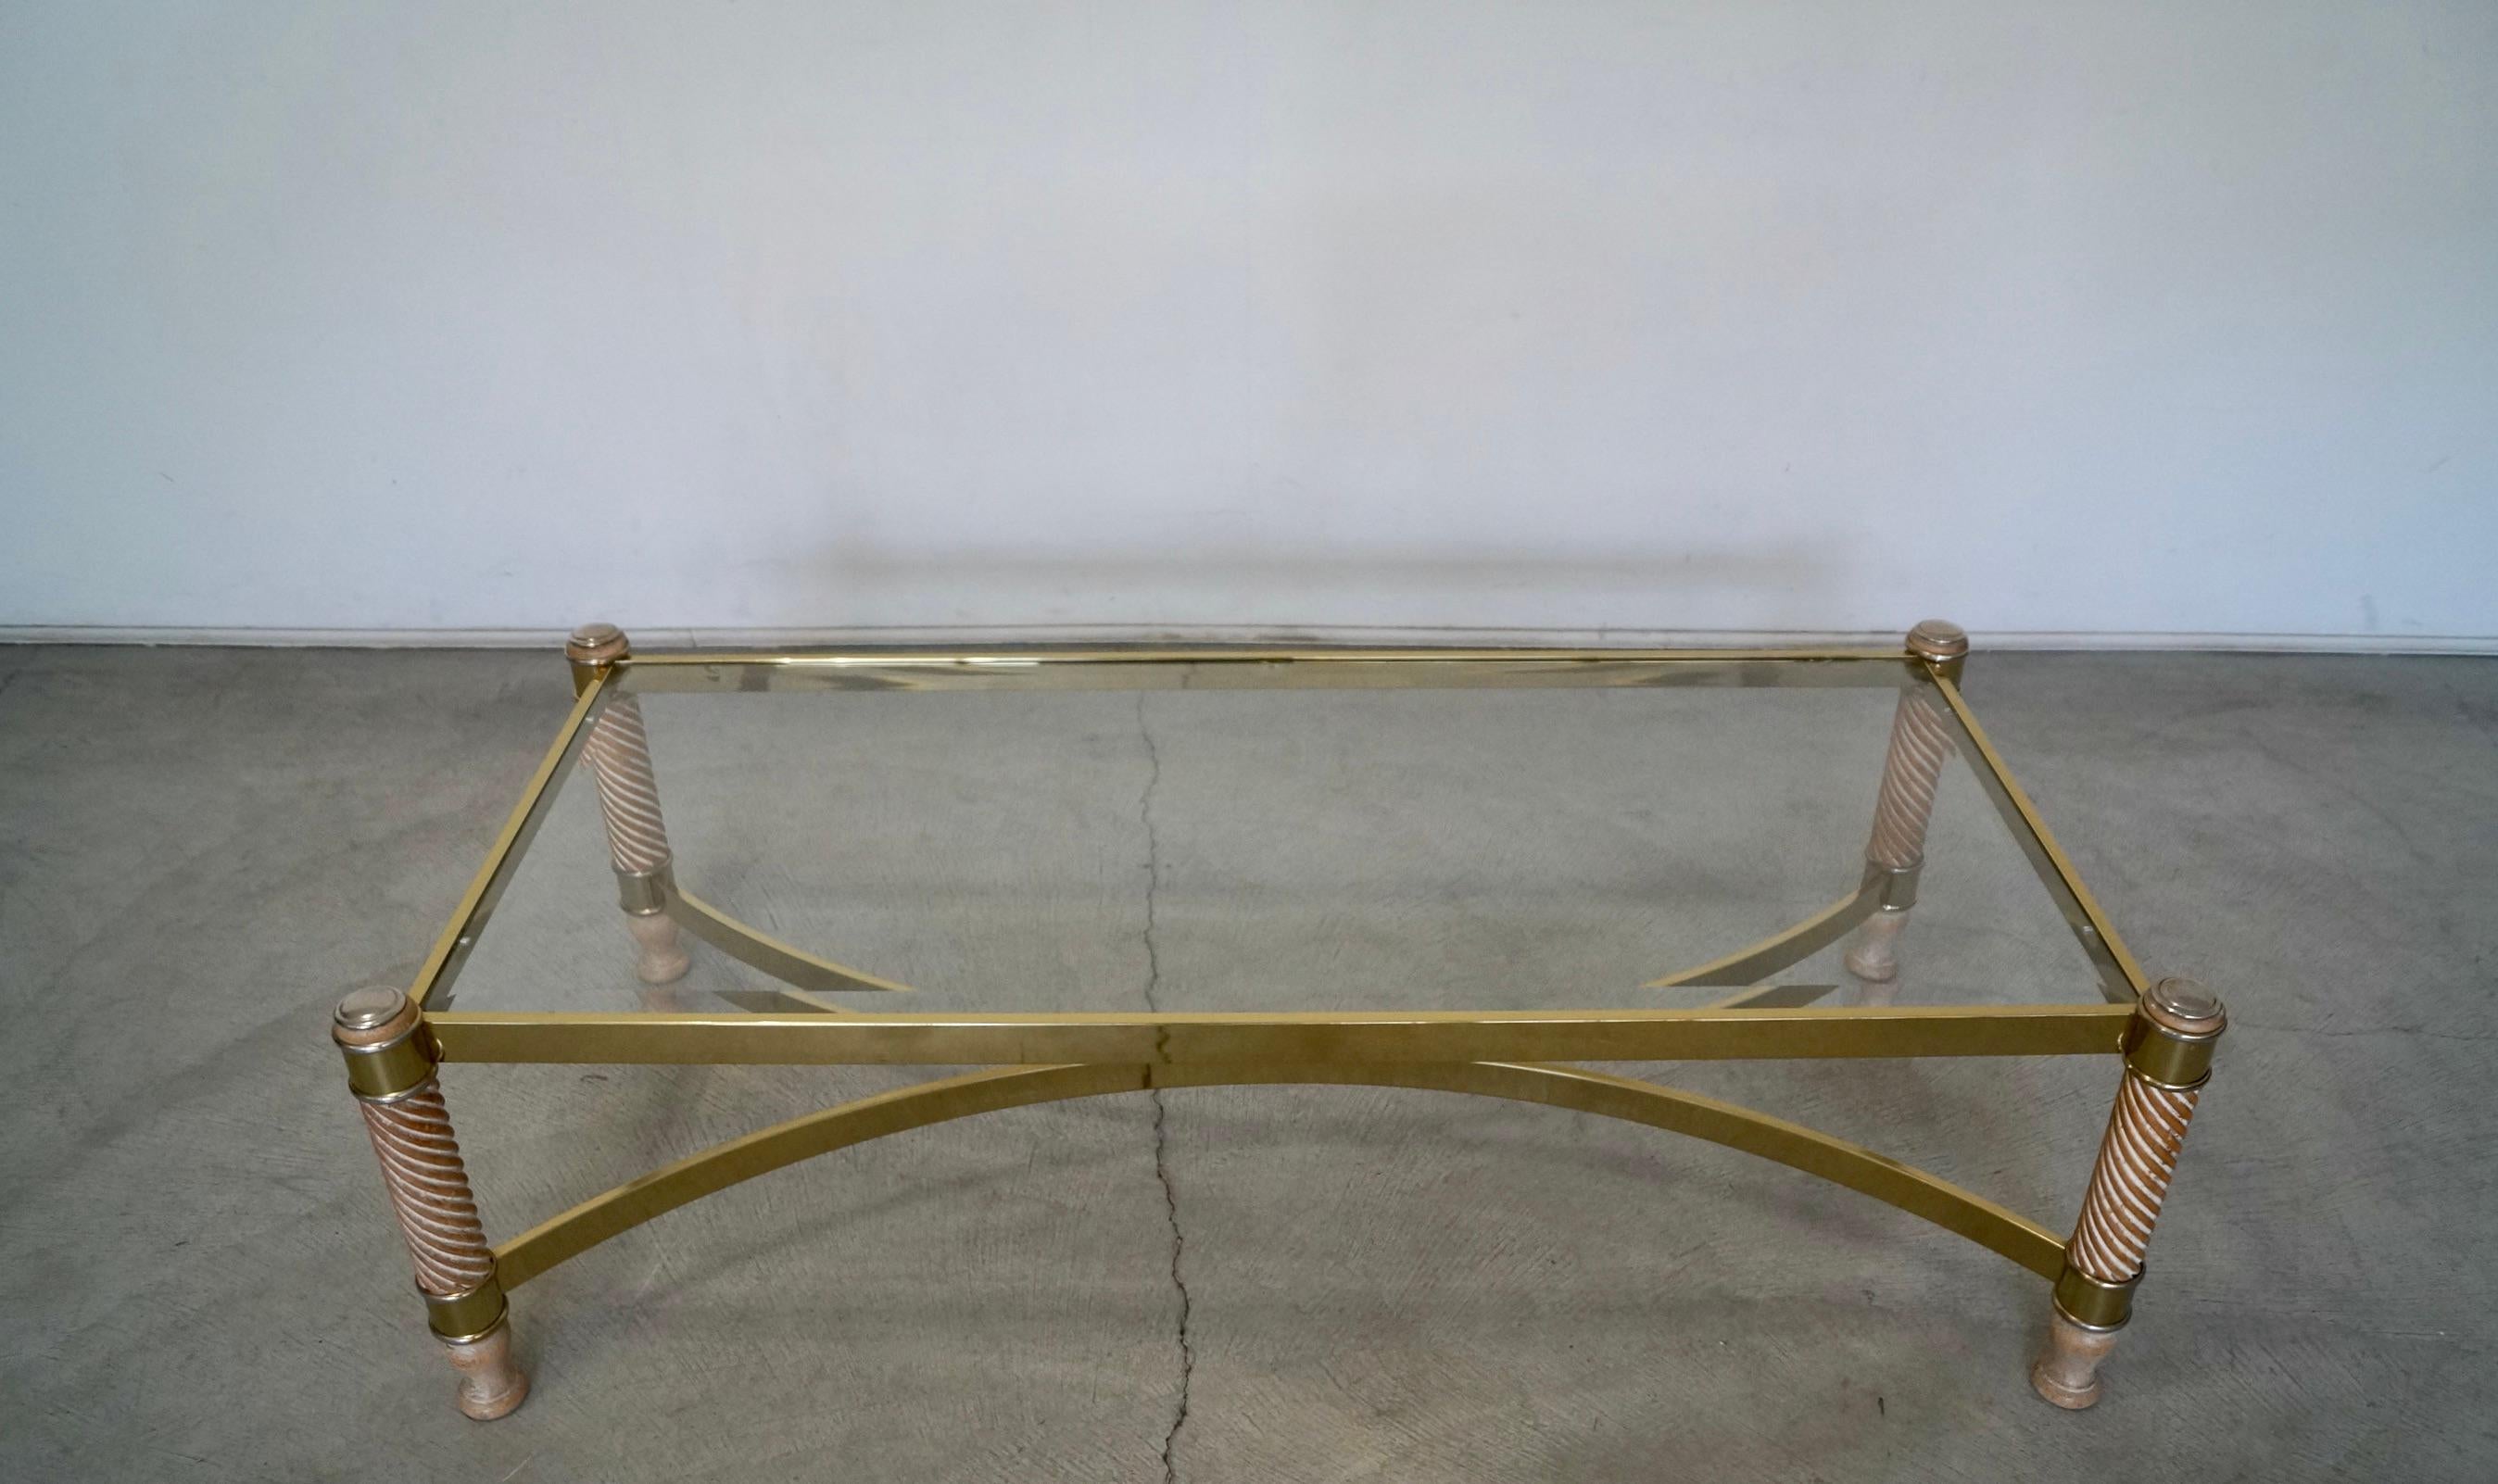 Vintage Hollywood Regency glass, brass, and wood coffee table for sale. It’s in amazing condition, and is very beautiful. It has a beveled glass insert in excellent condition with no chips or cracks. The brass is in incredible condition. It has four